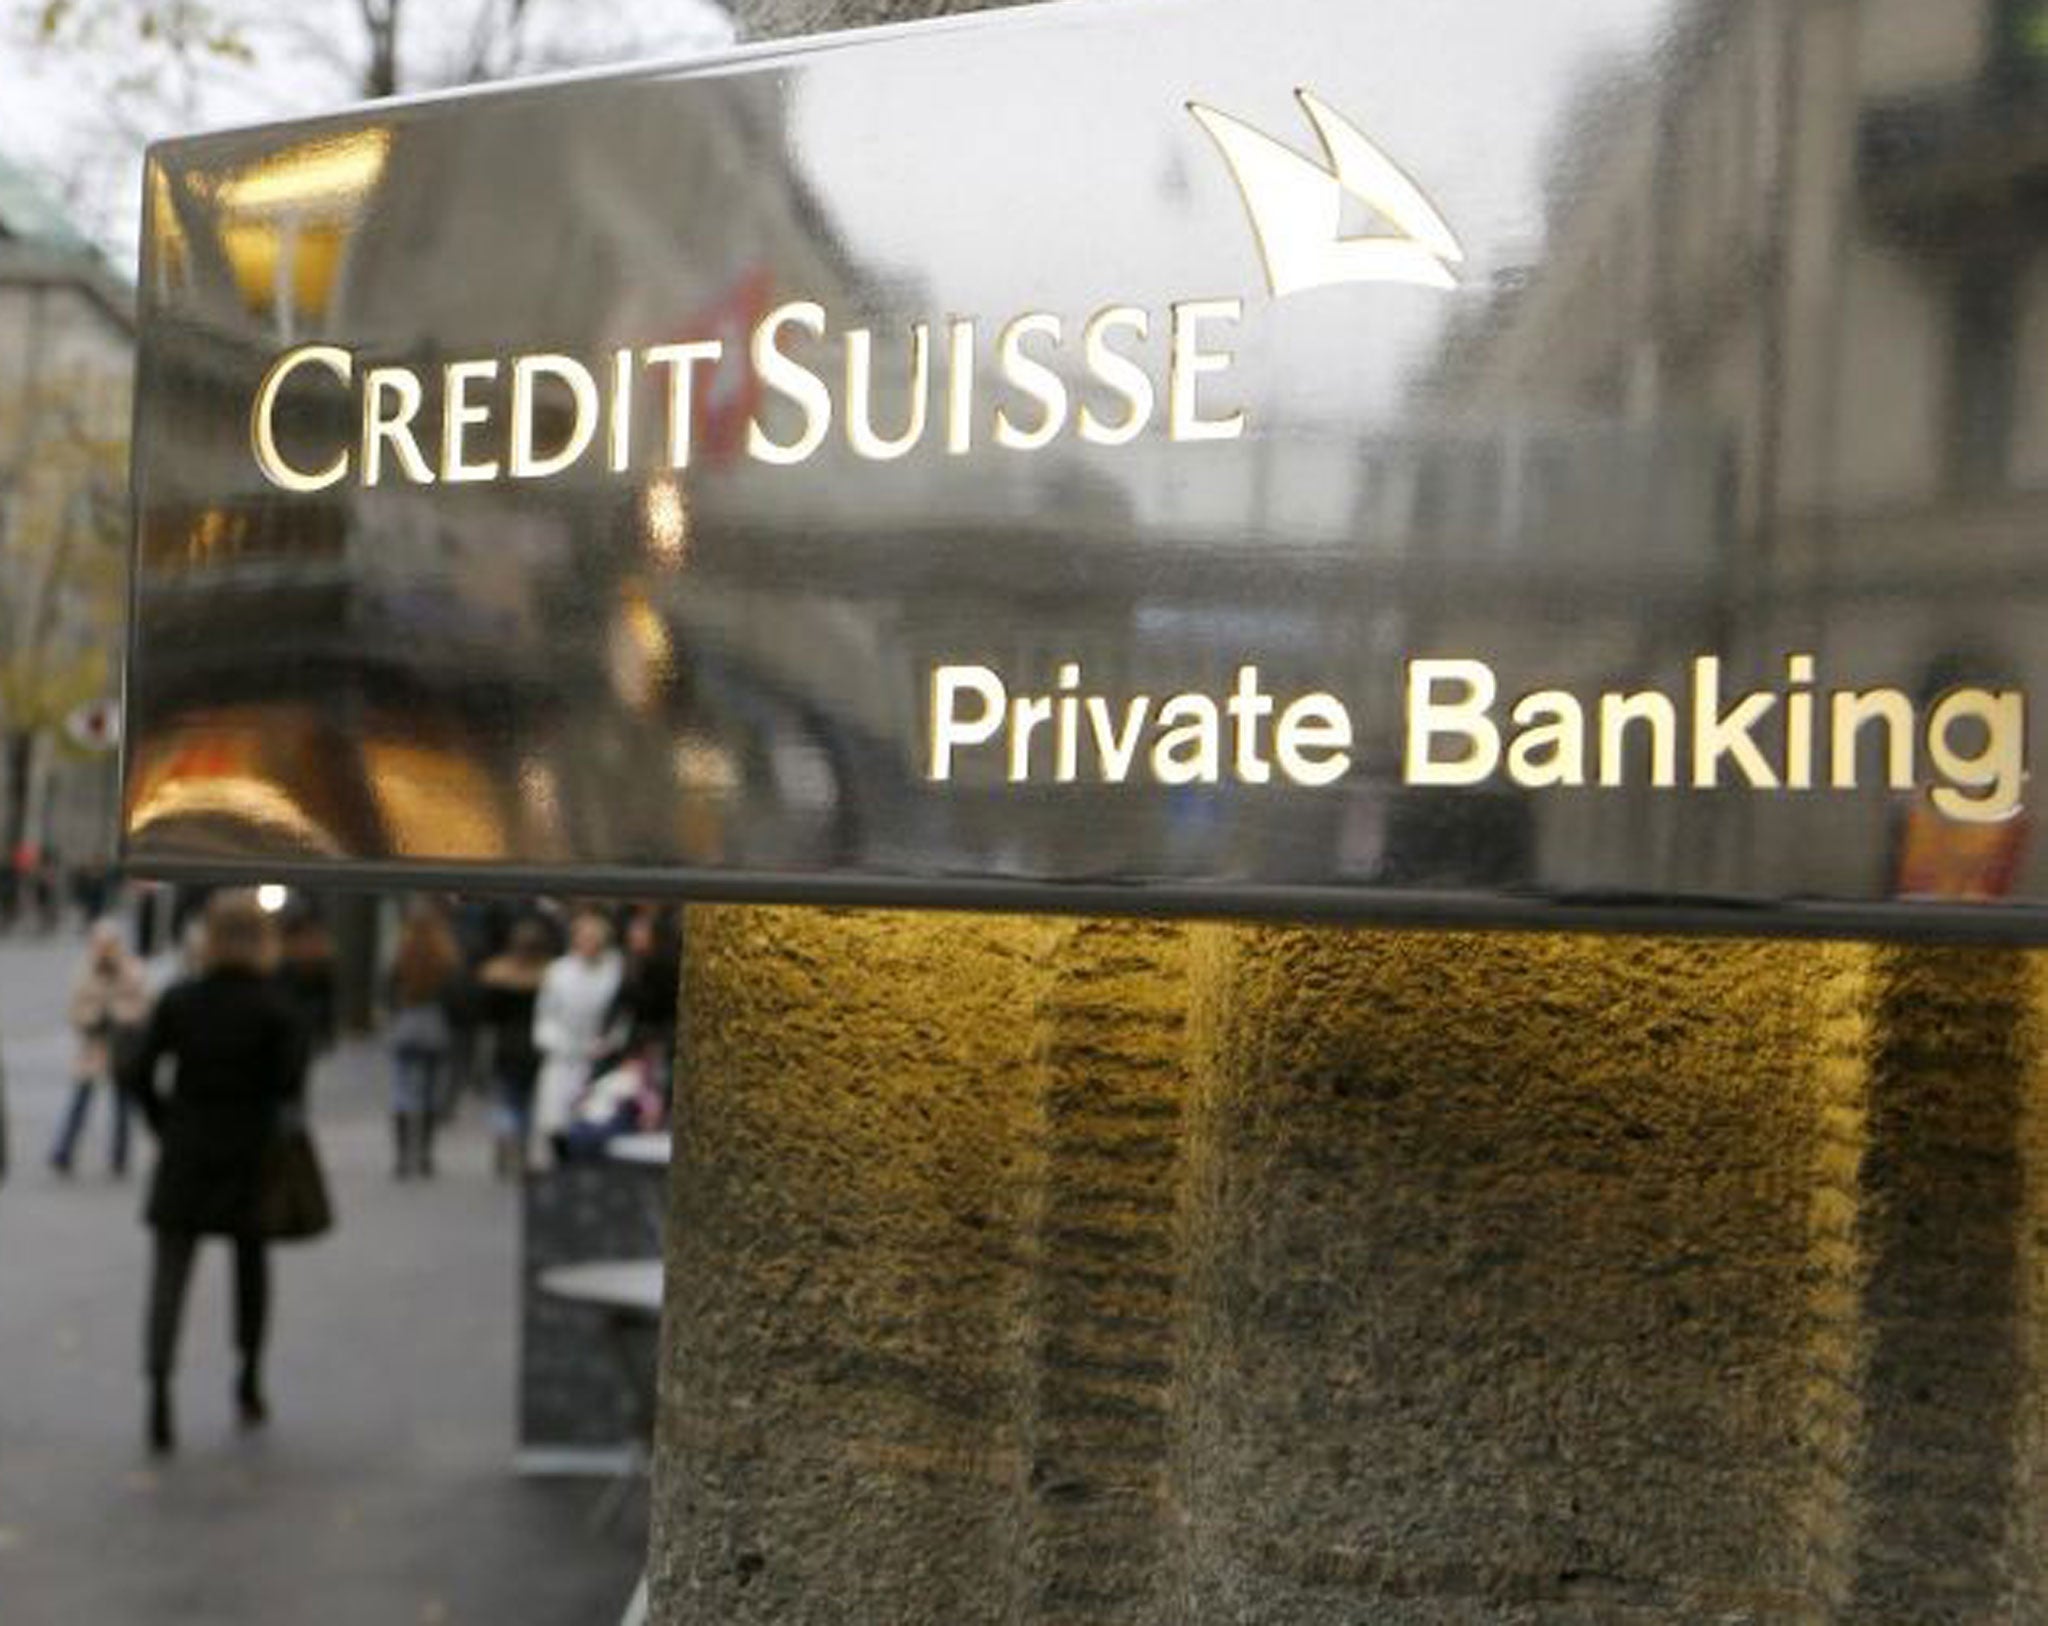 Credit Suisse declined to comment on whether it had suspended any employees but said it was investigating the issue